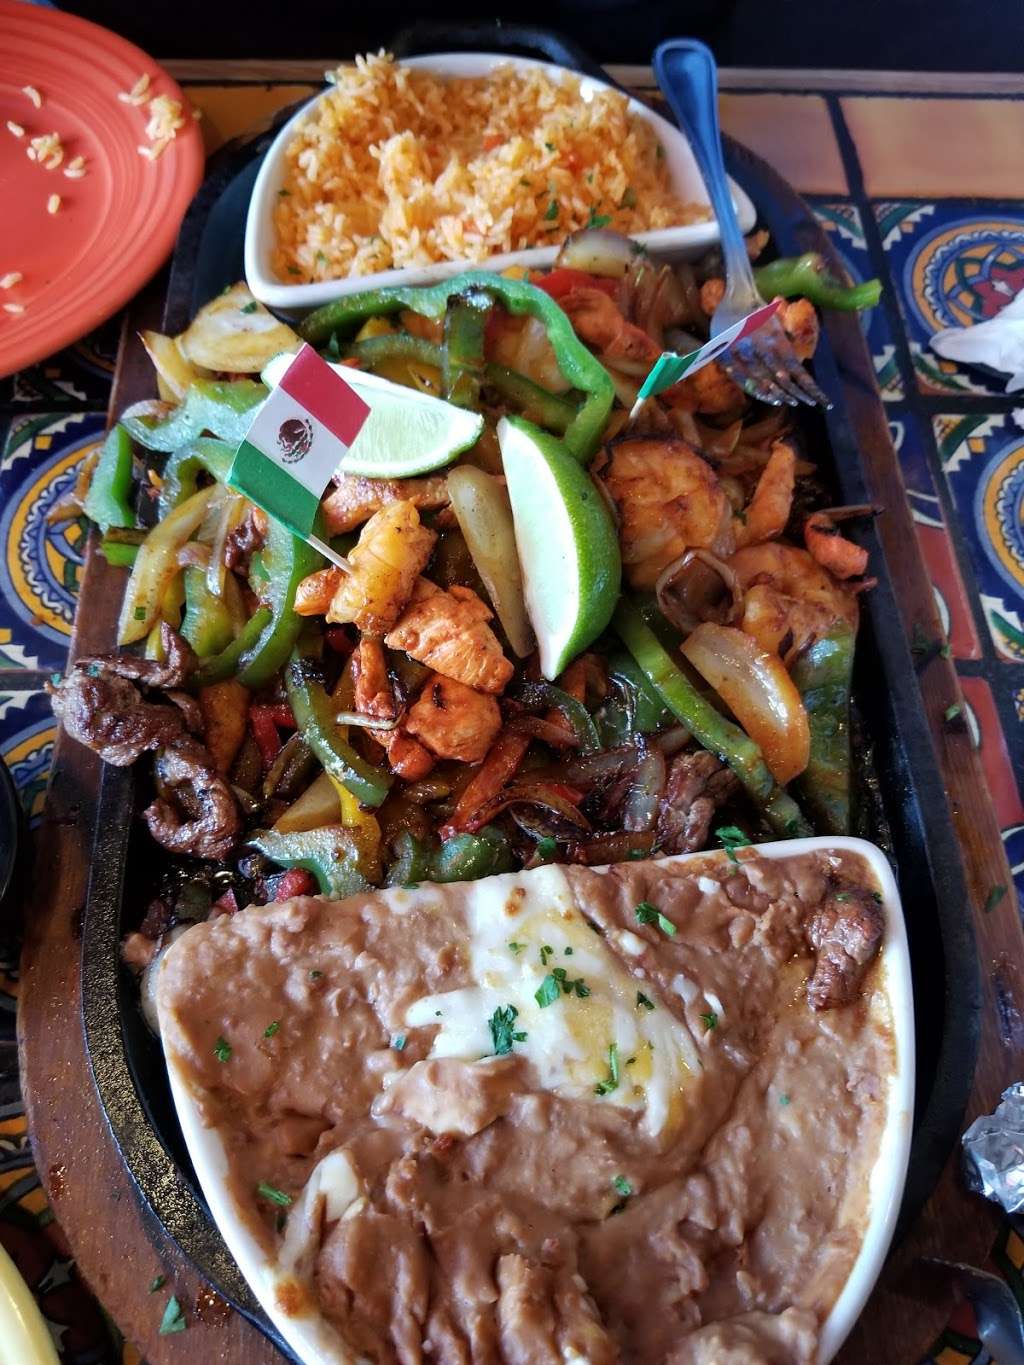 Mezcal Mexican Restaurant & Bar | 9958 Reisterstown Rd, Owings Mills, MD 21117 | Phone: (410) 205-7150